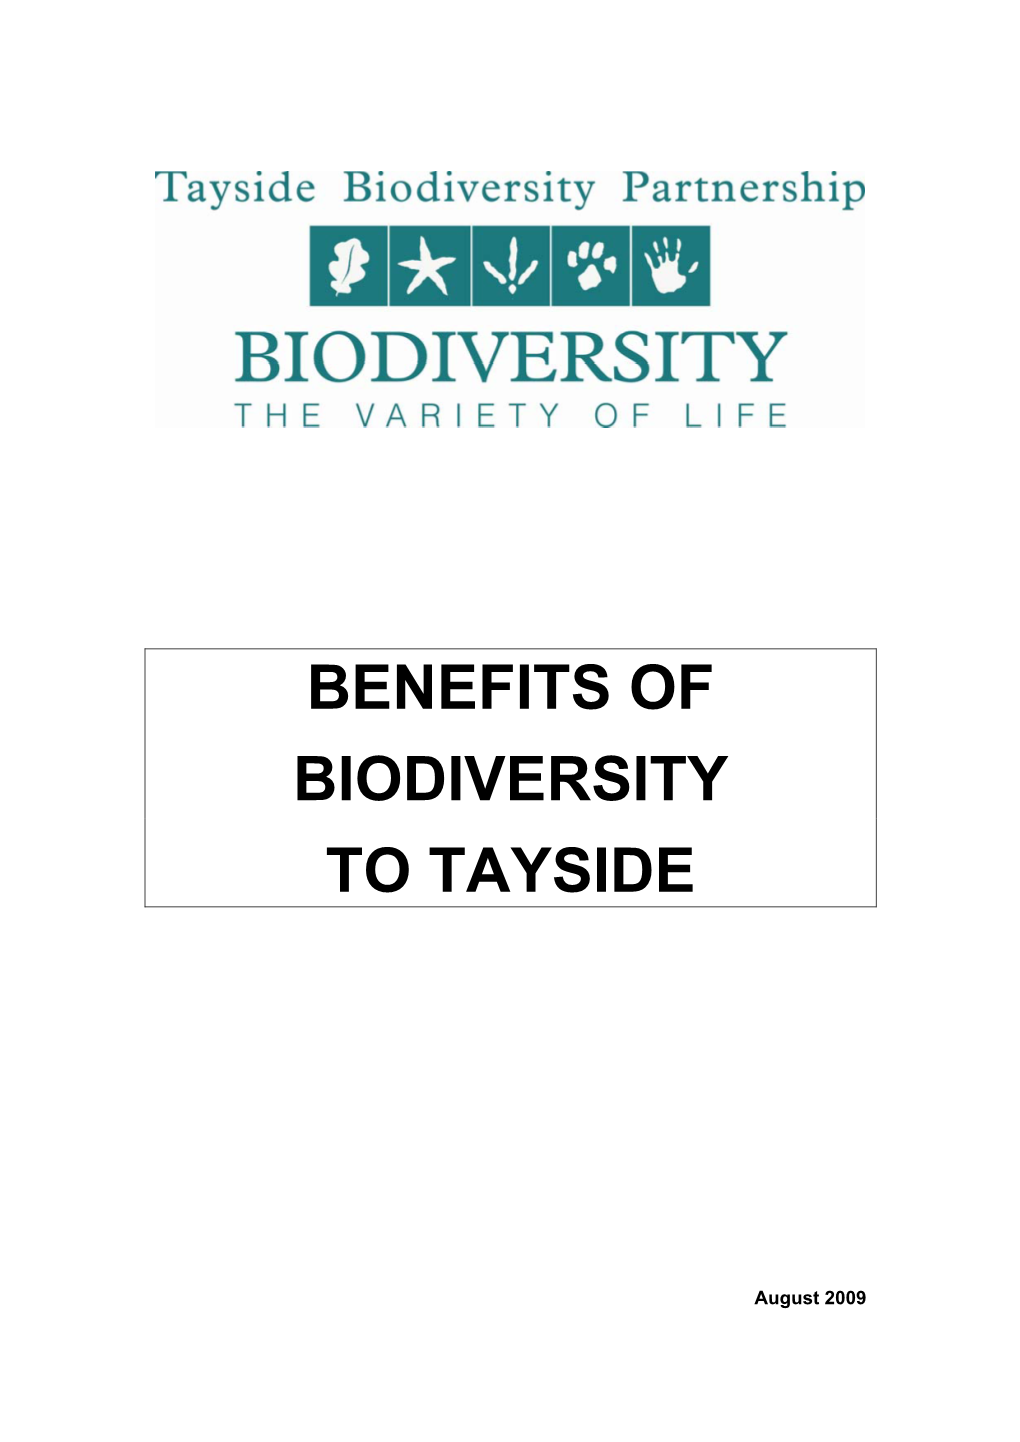 Tayside Biodiversity Partnership Has Provided a Unique and Vital Link Between Public, Private and Voluntary Groups, As Well As the General Community